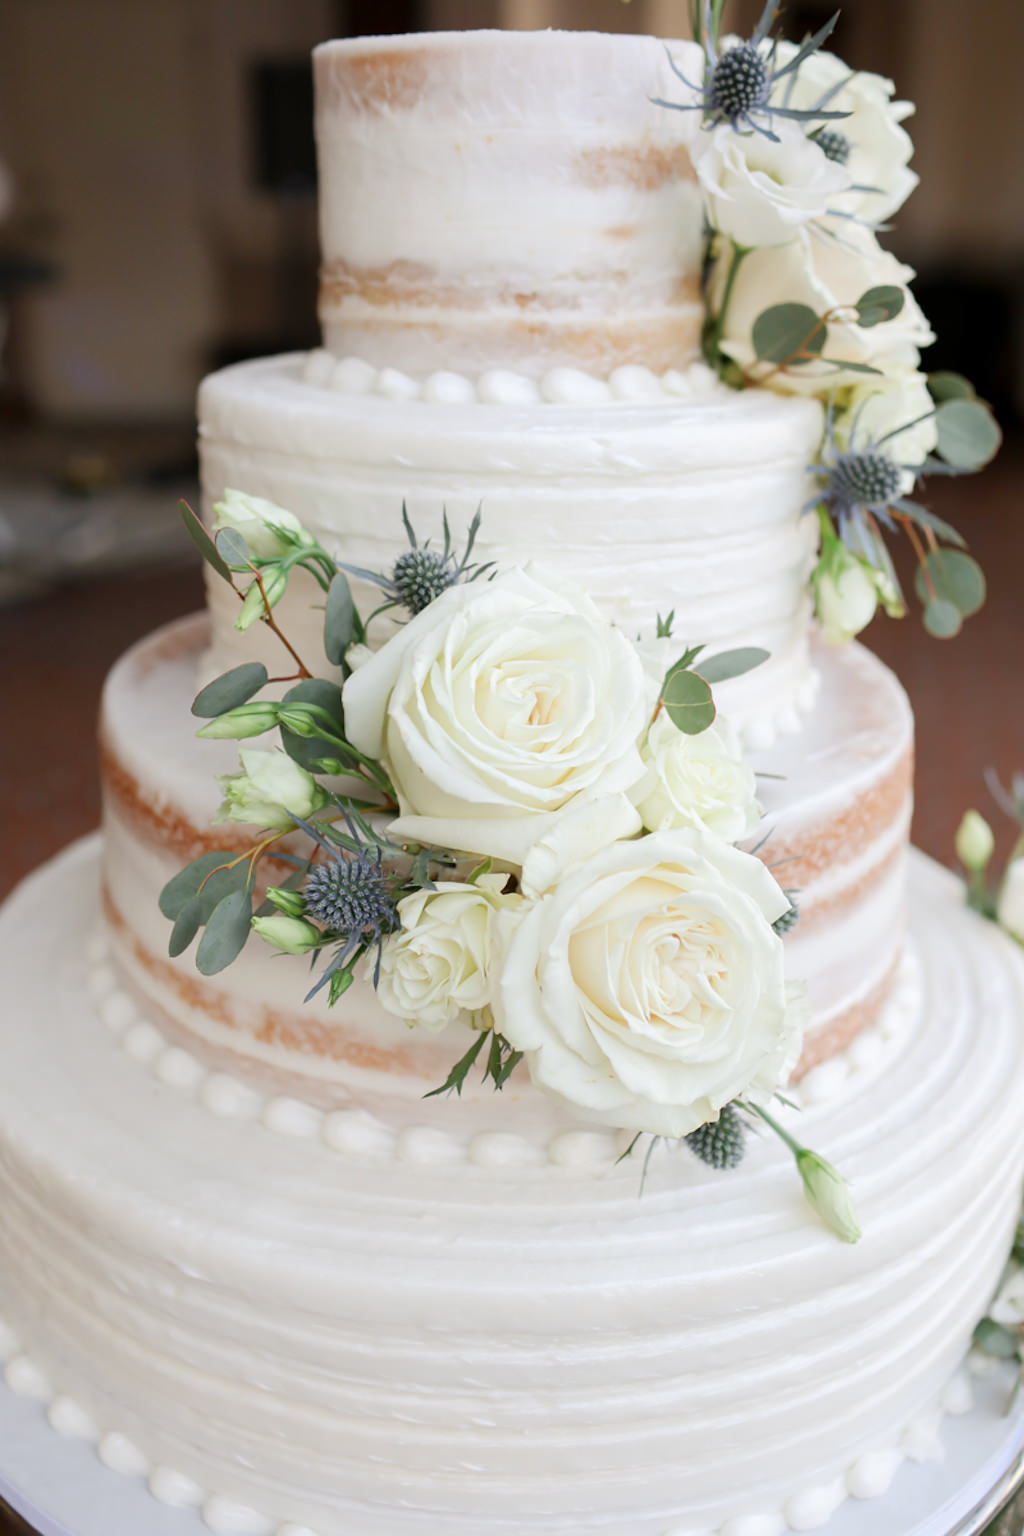 Rustic Elegant Four Tier White and Semi Naked Wedding Cake with Ivory Roses and Blue Thistle. Real Flowers | Wedding Photographer Lifelong Photography Studios